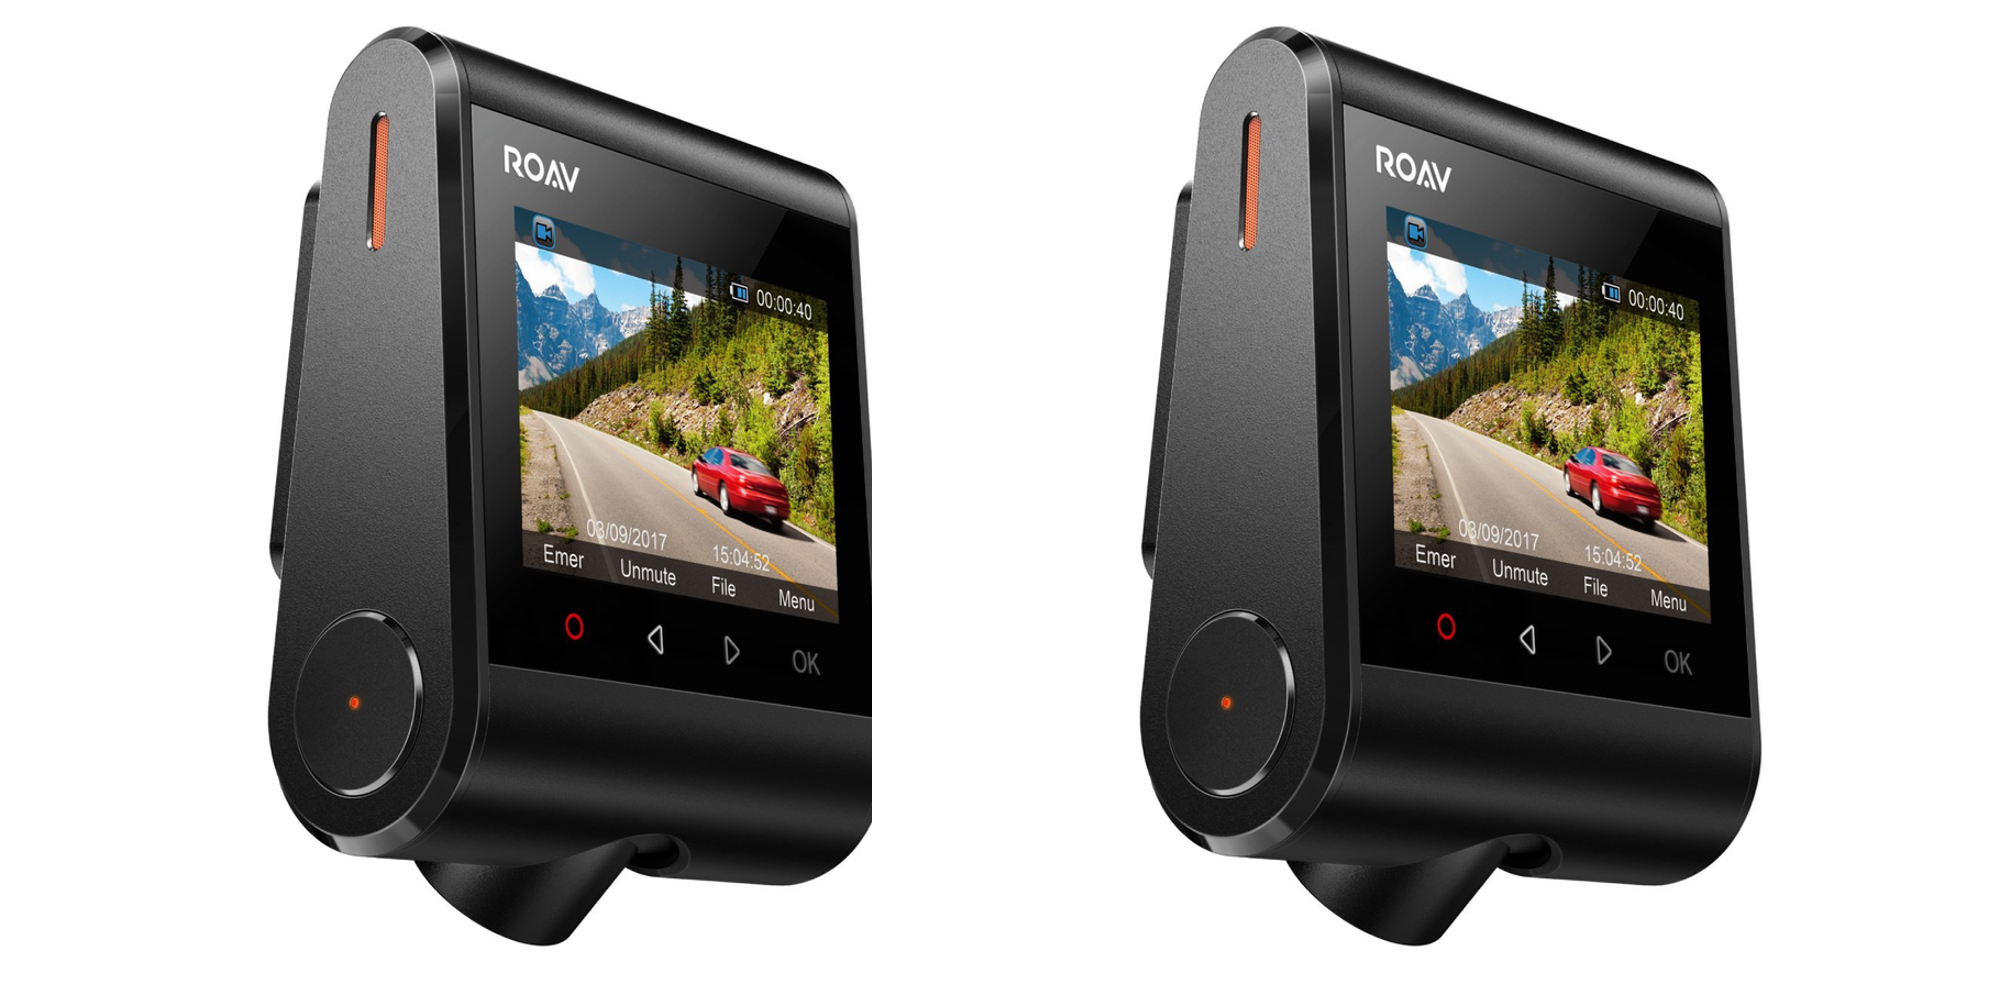 Anker's Roav C1 Dash Cam falls to lowest price this year at $52